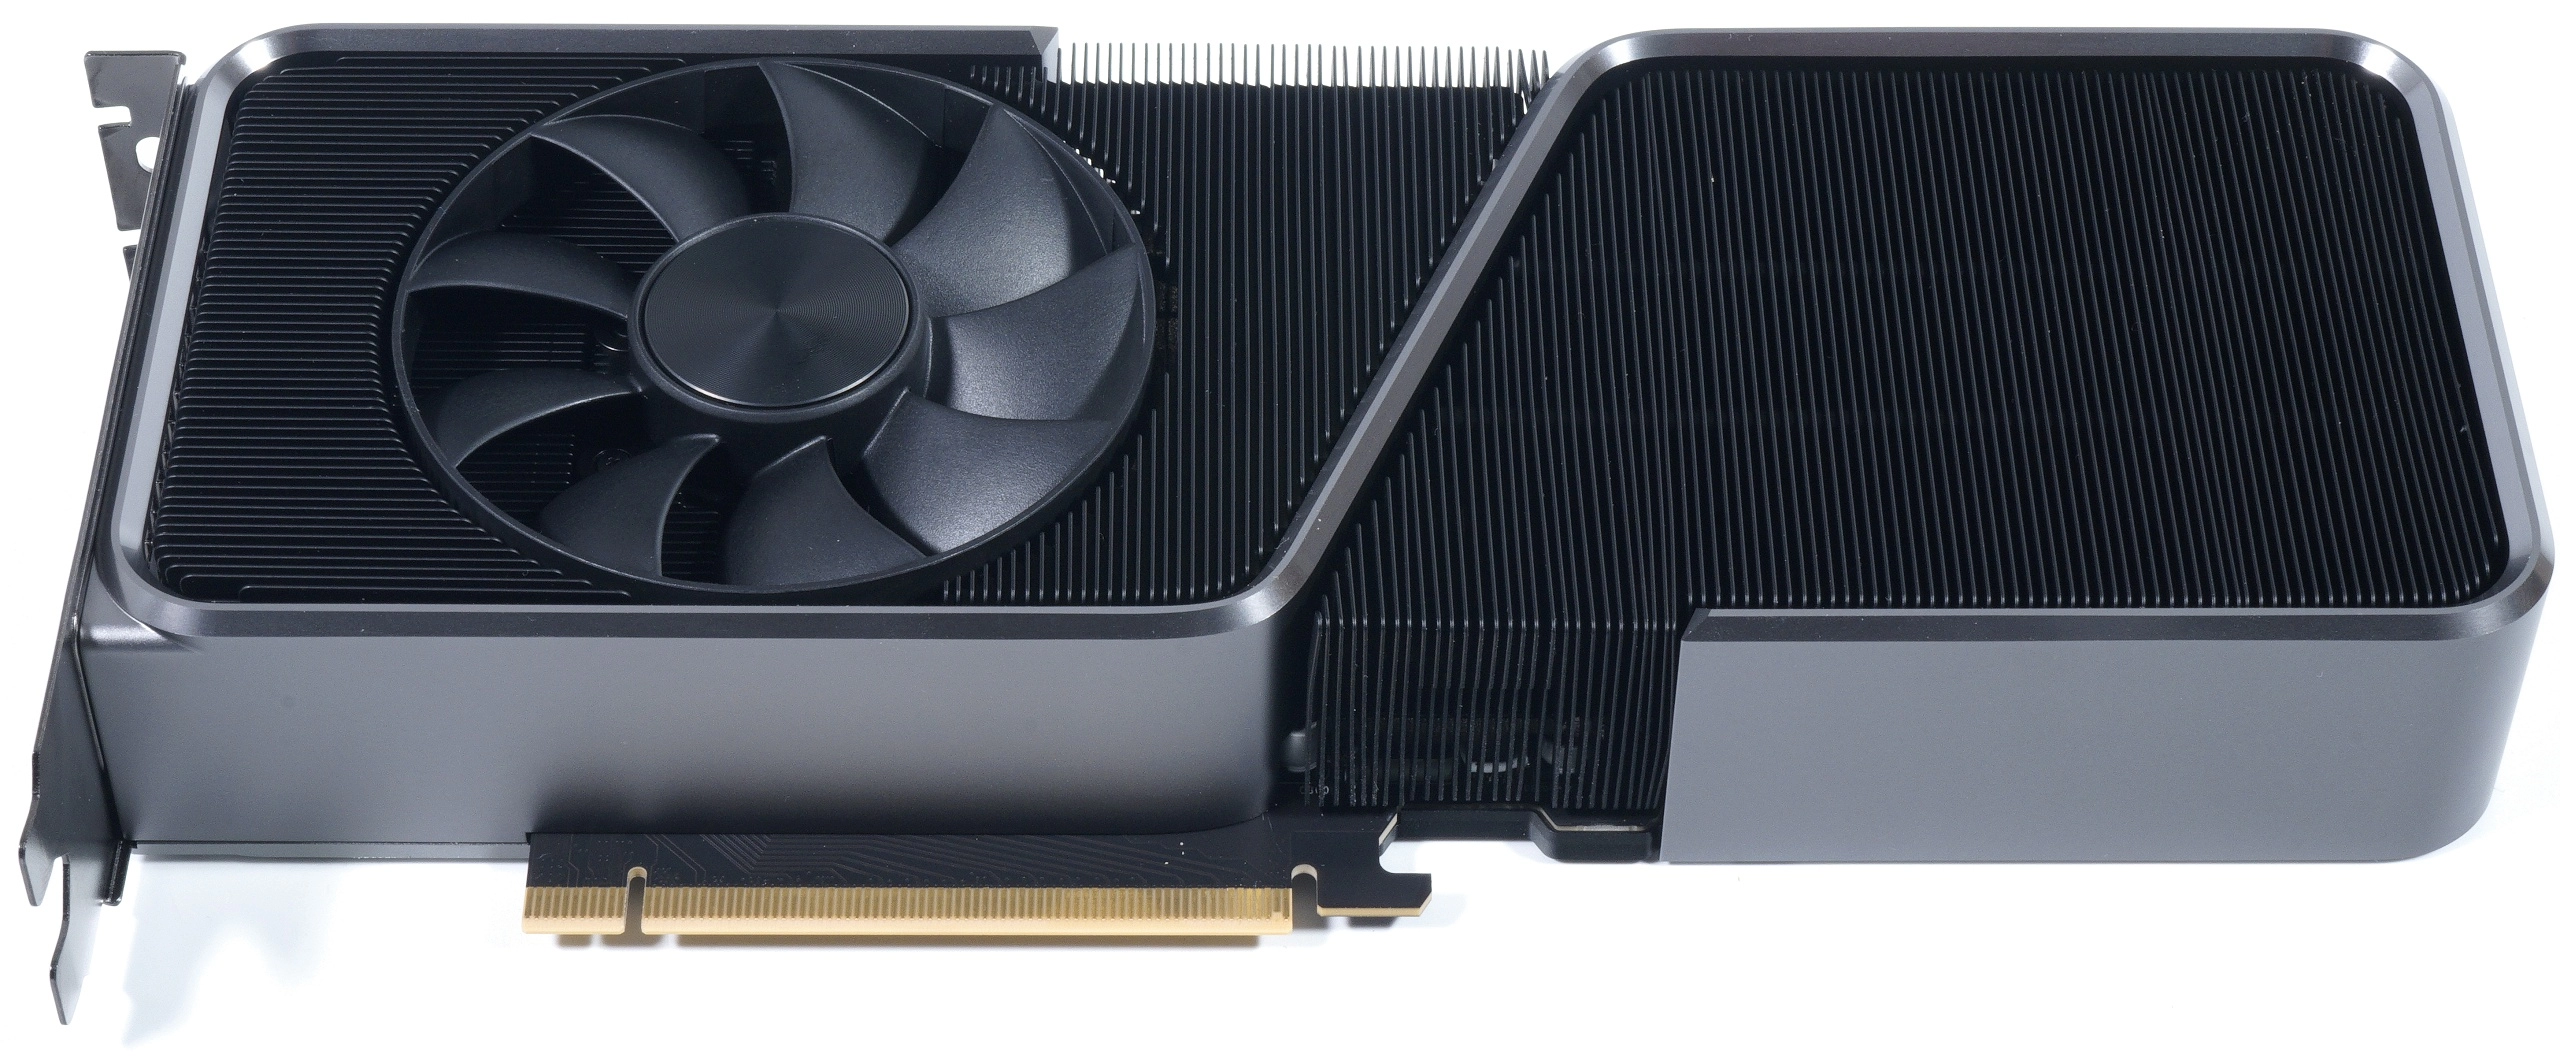 NVIDIA GeForce RTX 3070 Ti Founders Edition Behind View